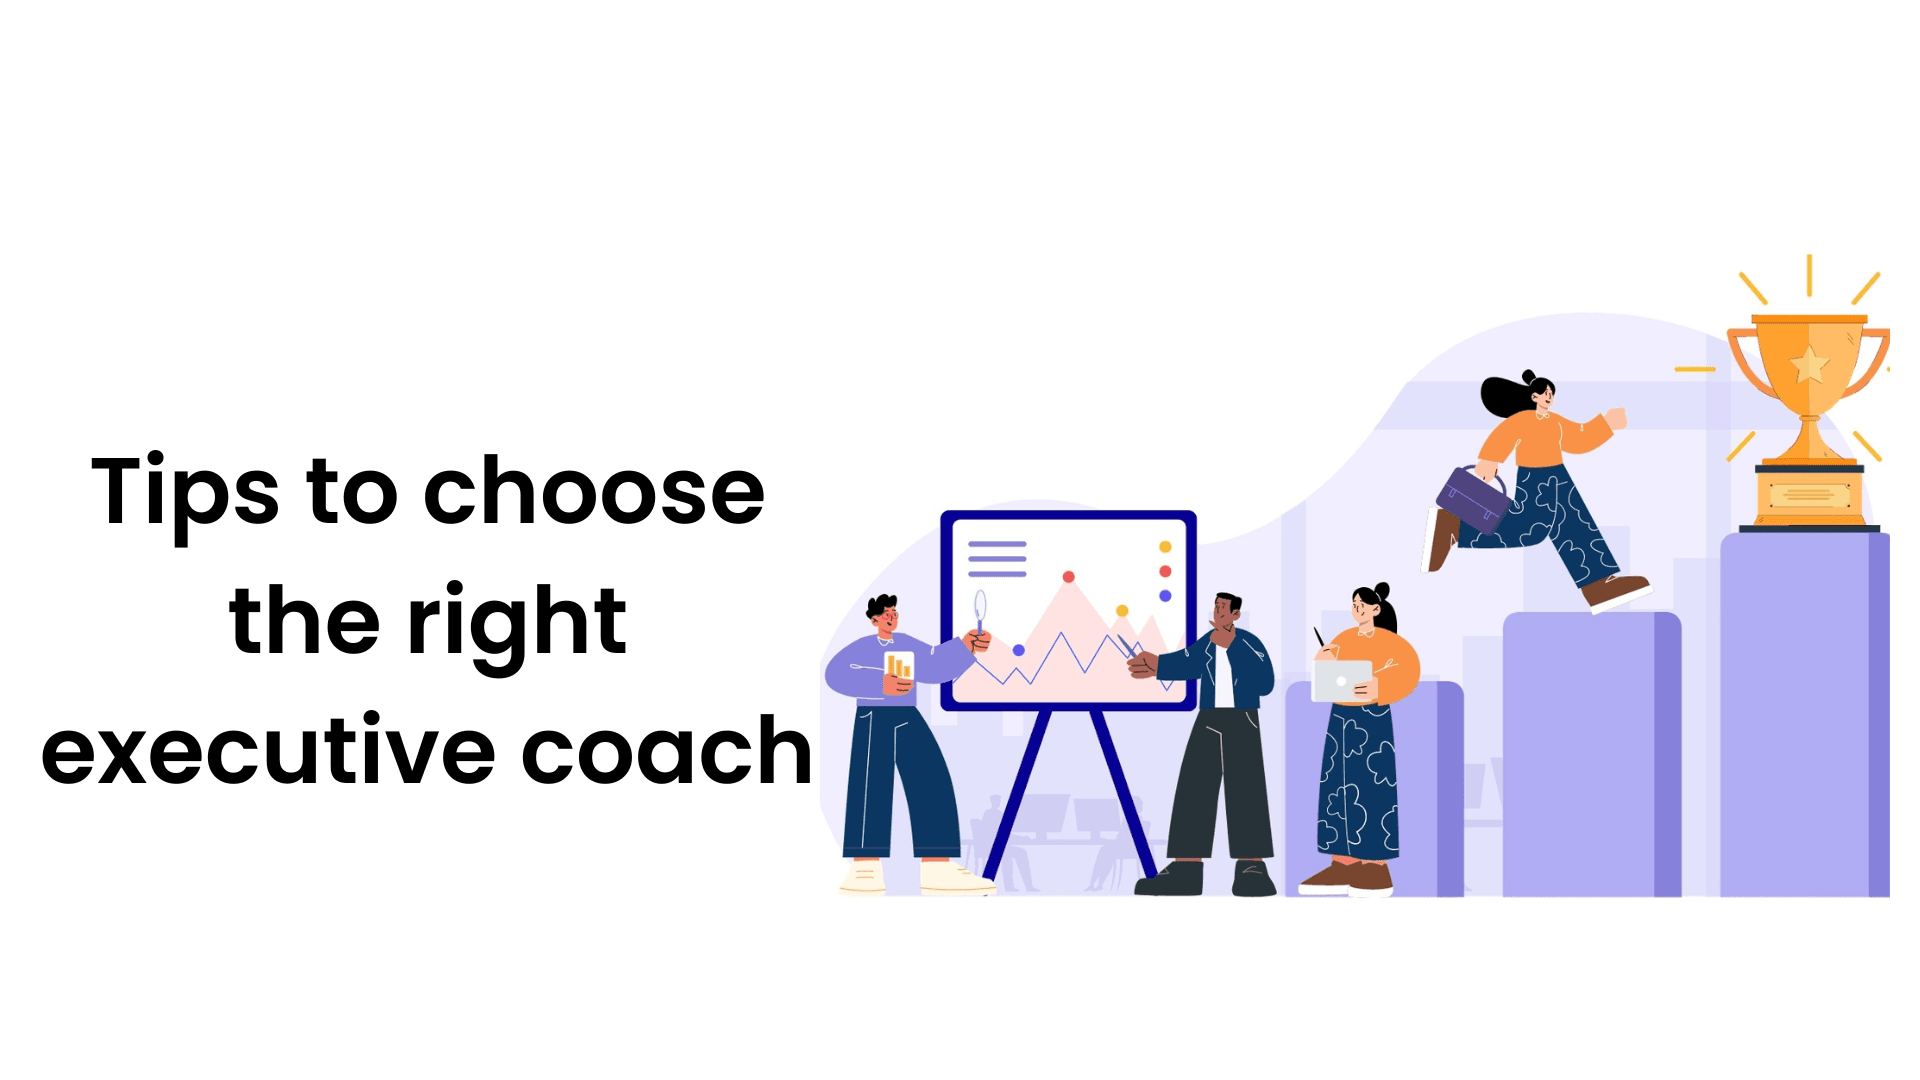 Getting the right coach is important